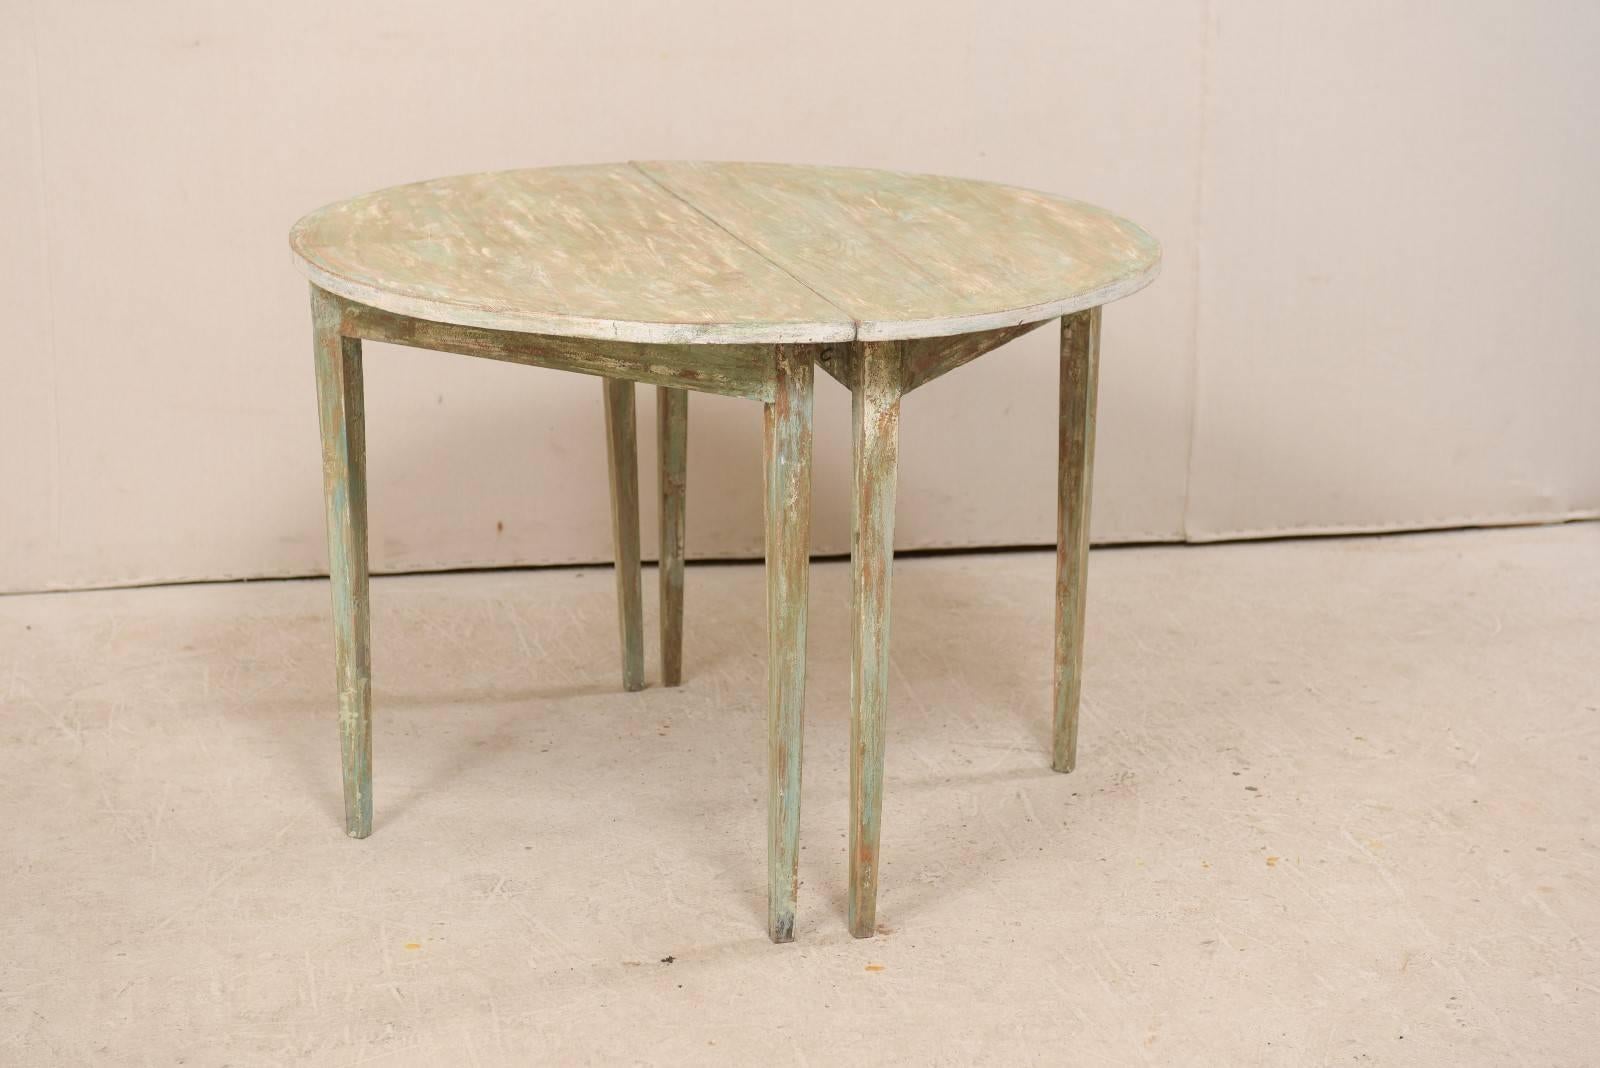 Pair of 19th Century Swedish Painted Wood Demilune Tables 6